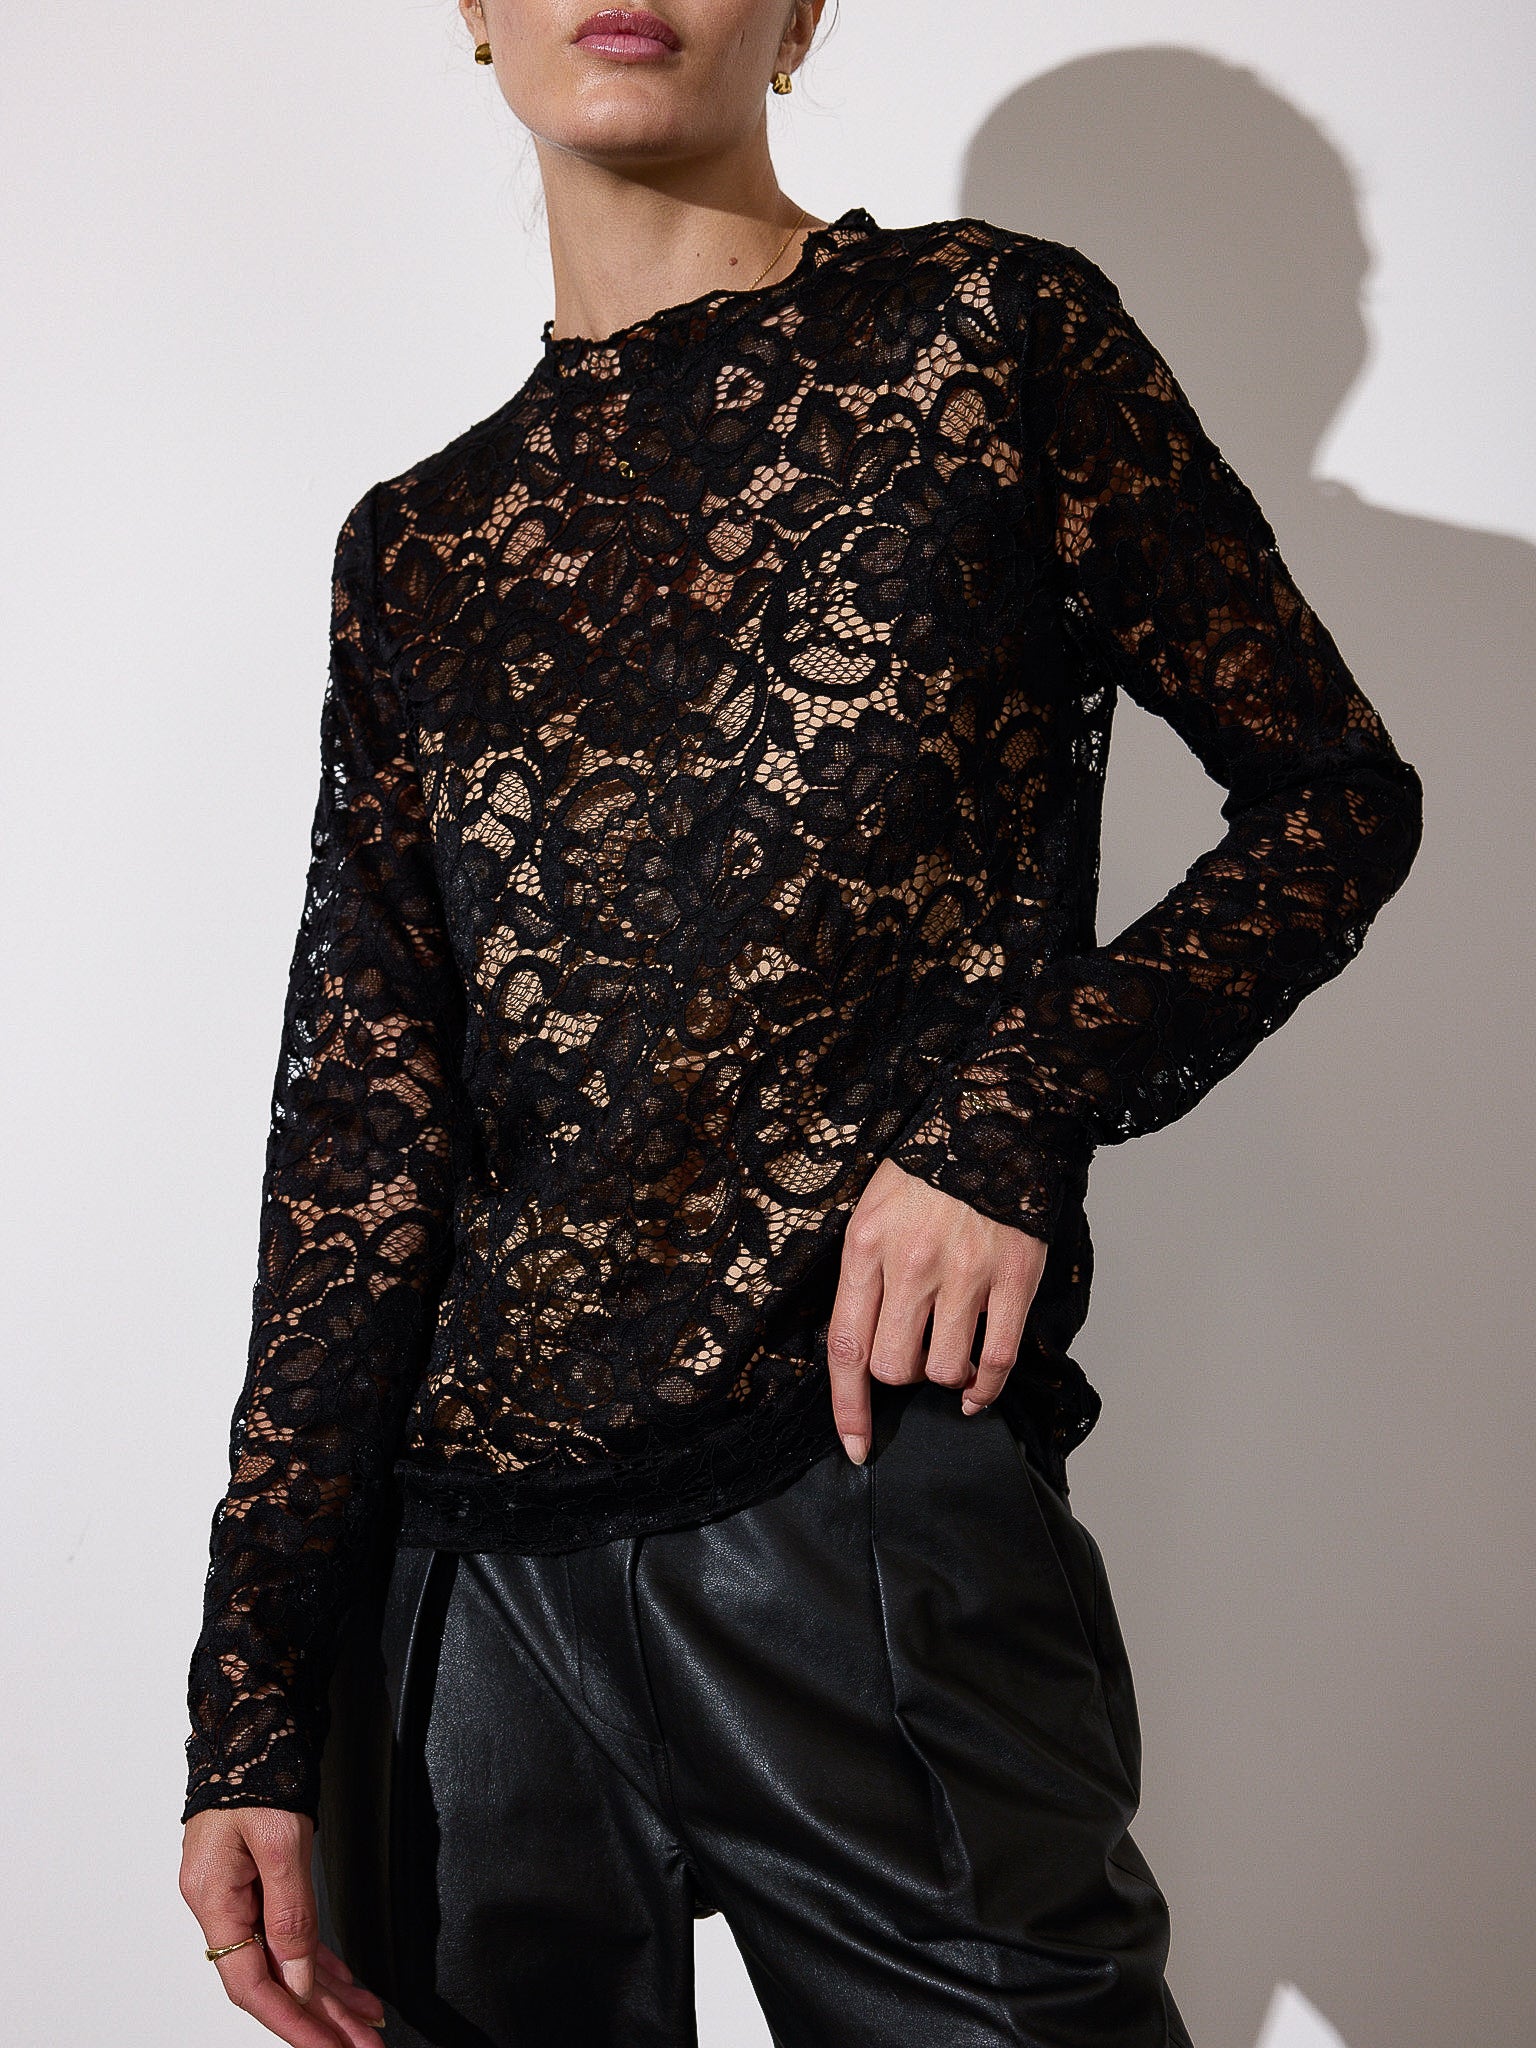 Donne black lace long sleeve top front view